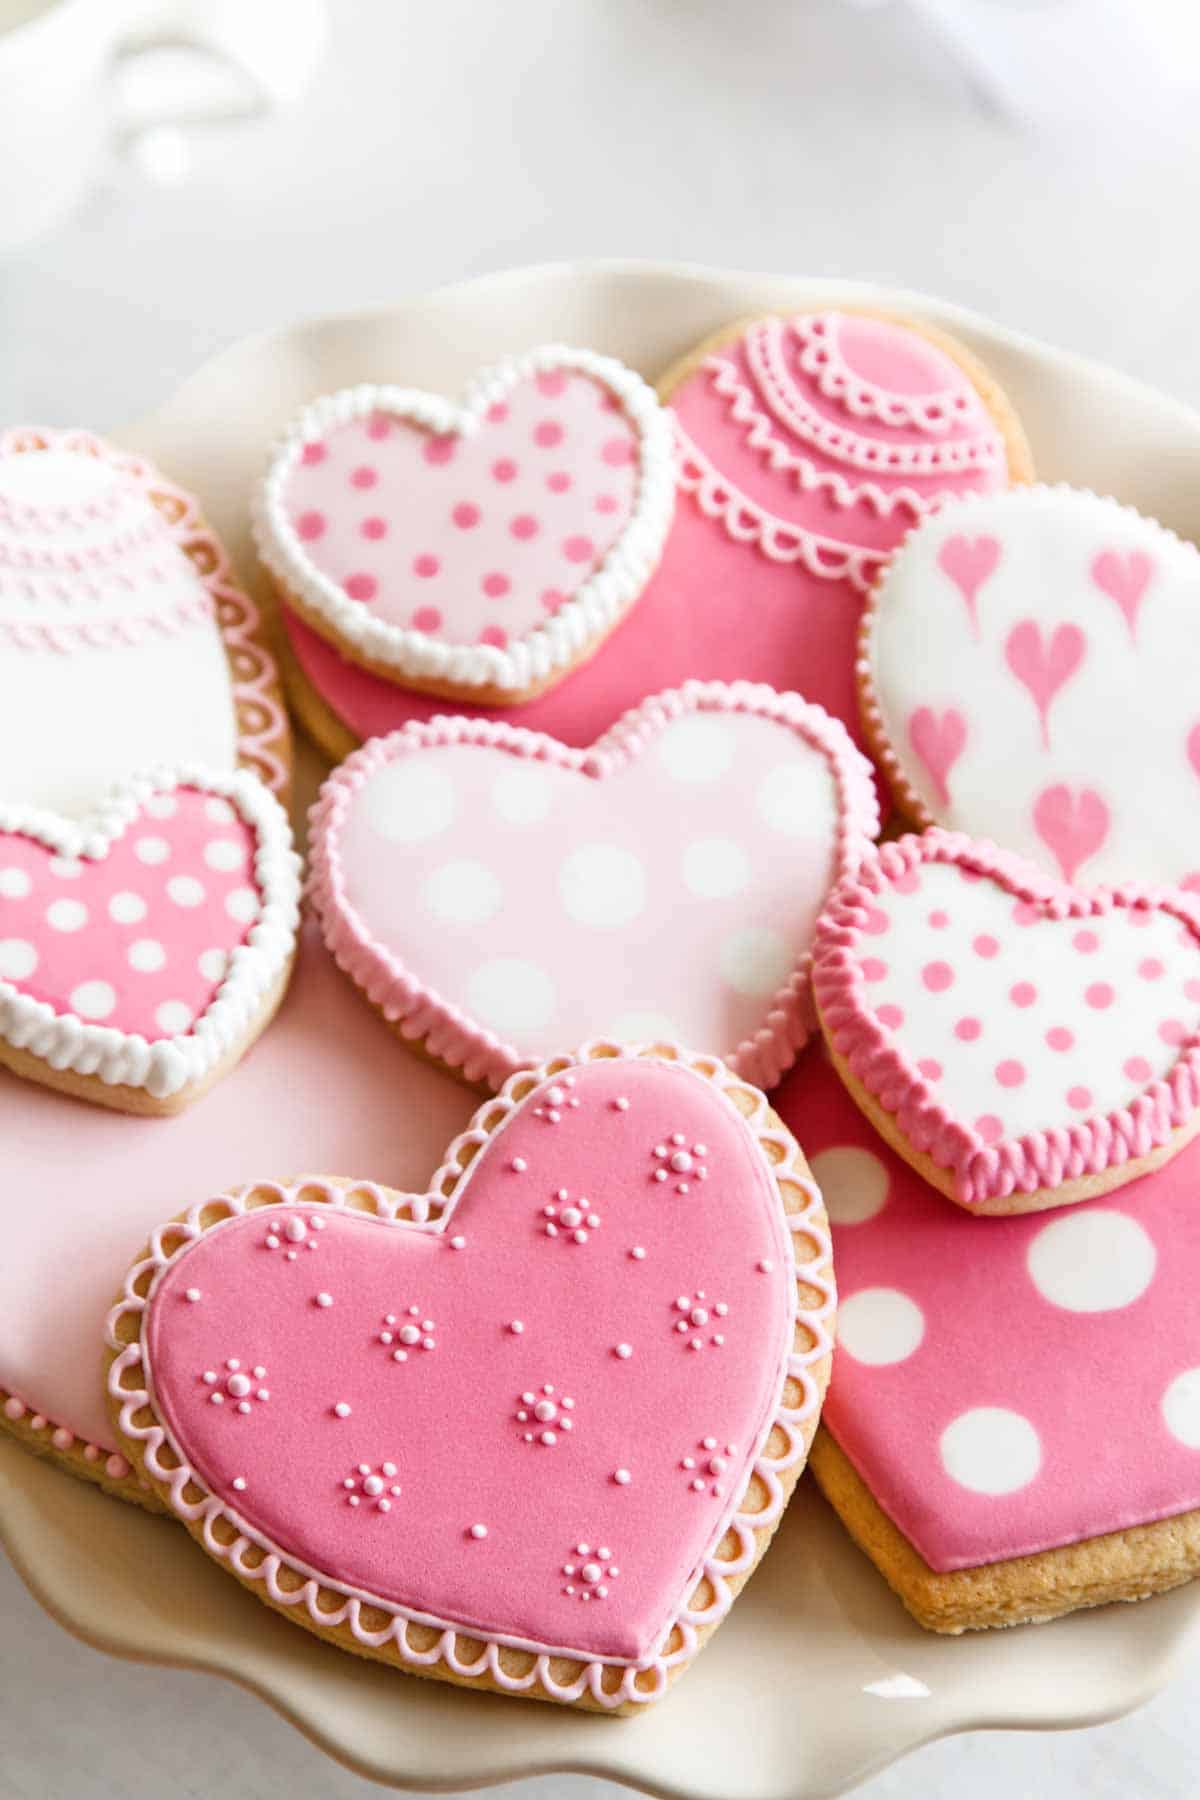 Plate of heart-shaped sugar cookies decorated with royal icing.